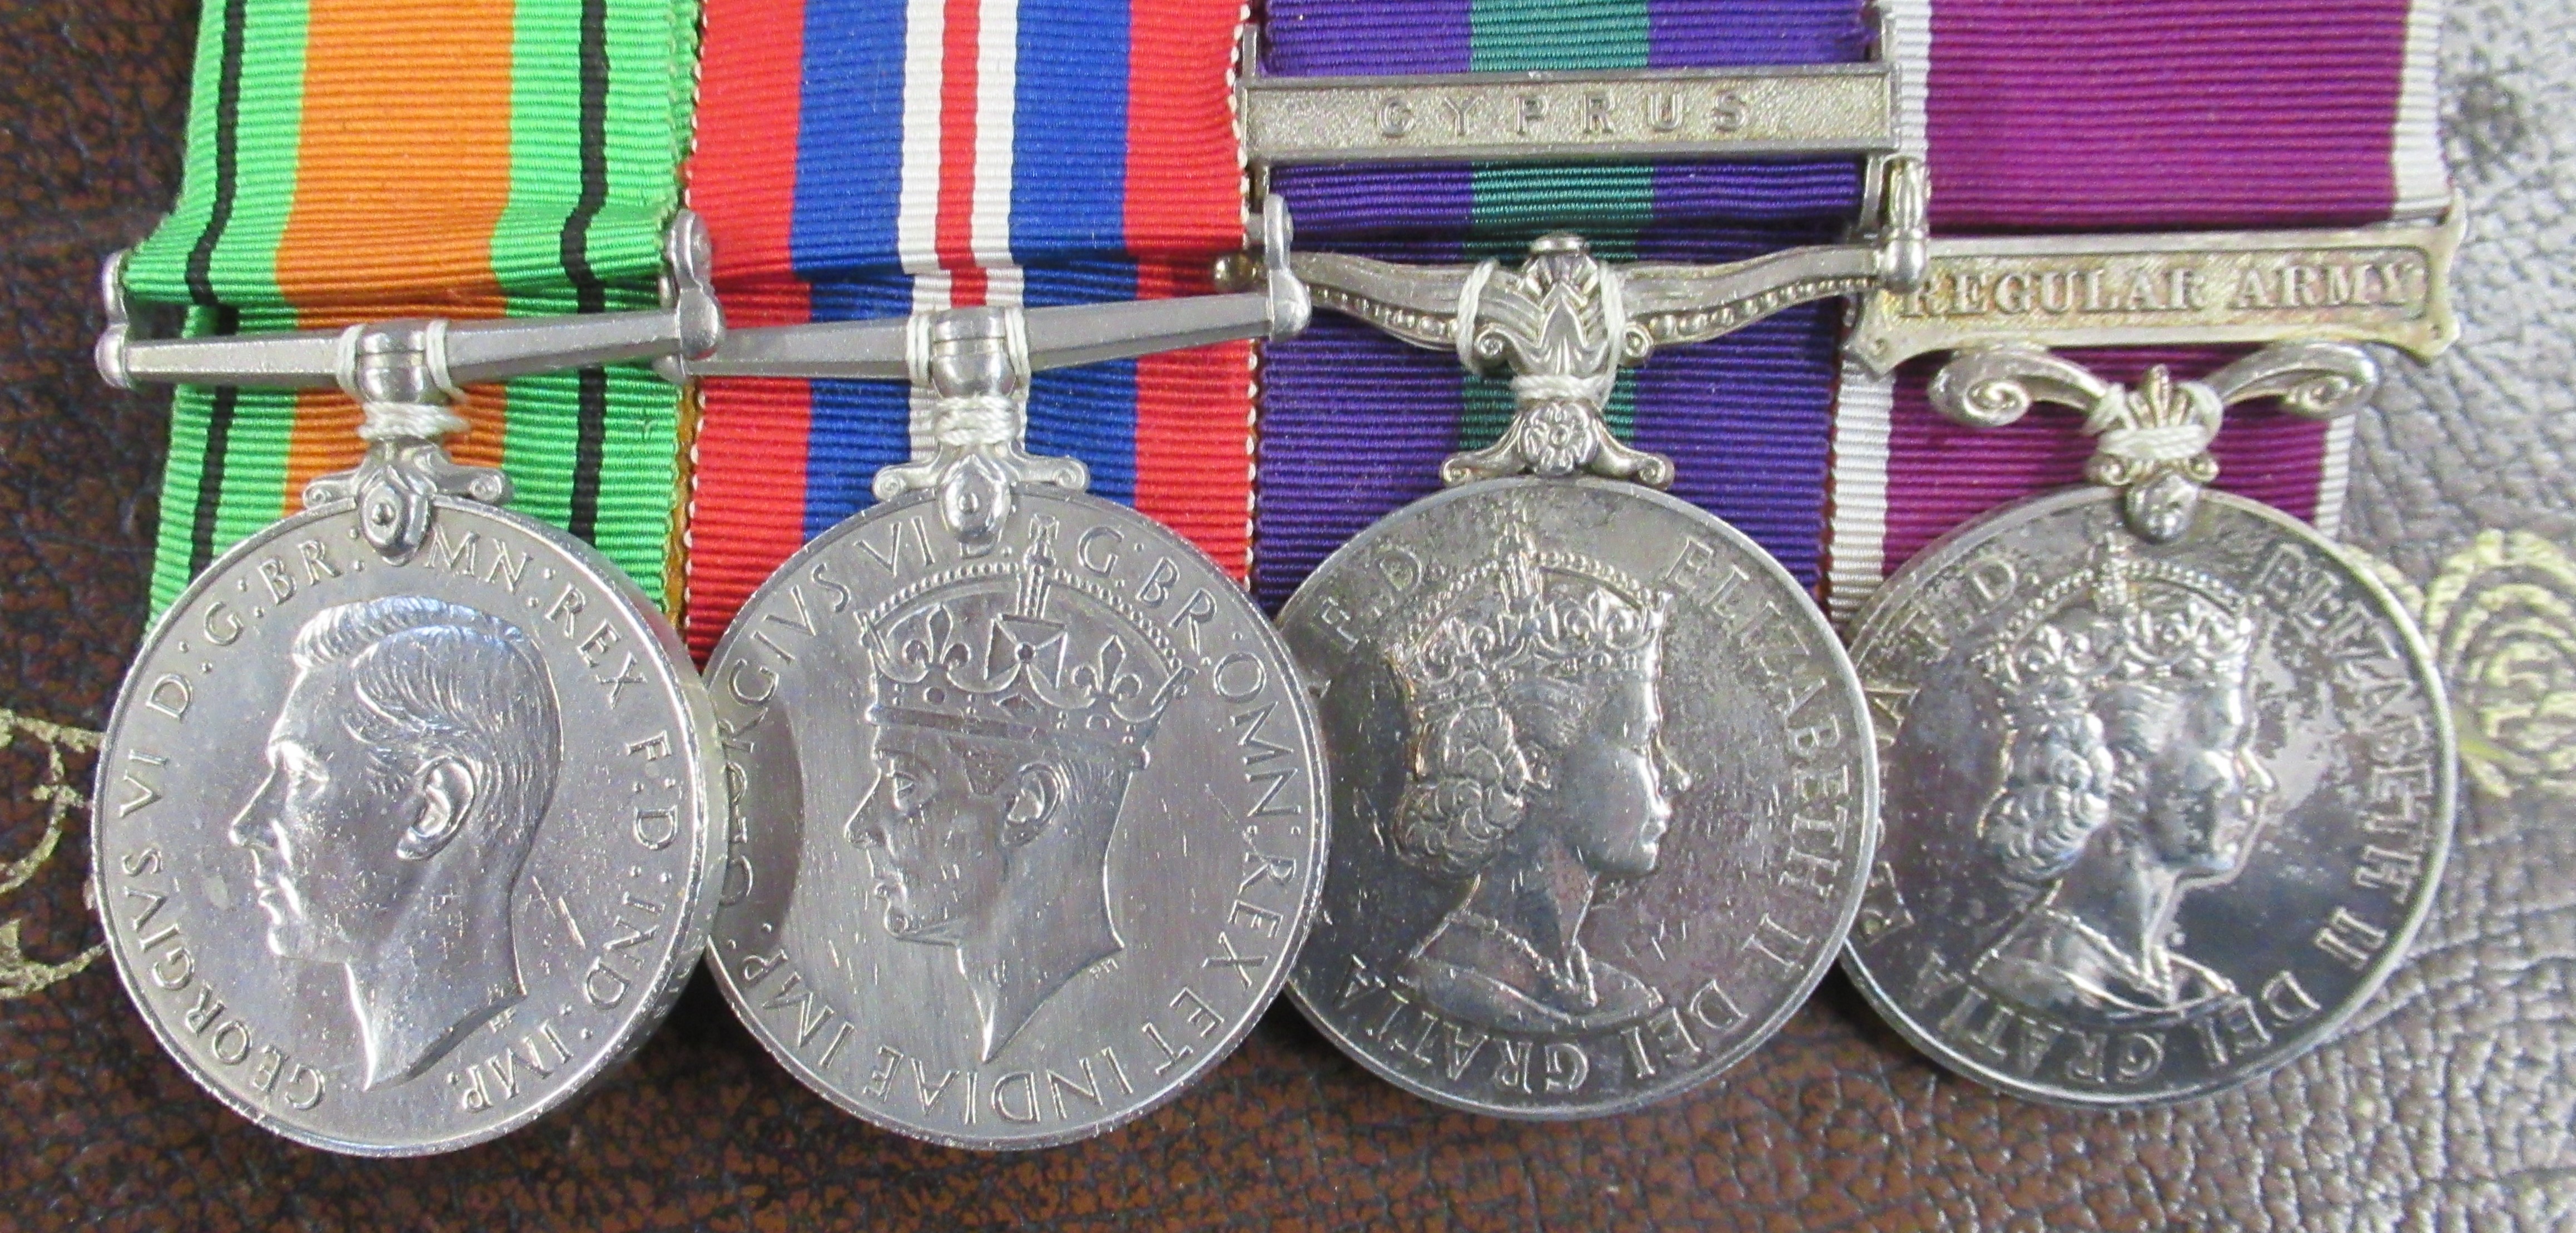 2547257 SIGM N. J.F.P. HEAD R. SIGS, two service medals, together with a Long Service and Good - Image 2 of 8